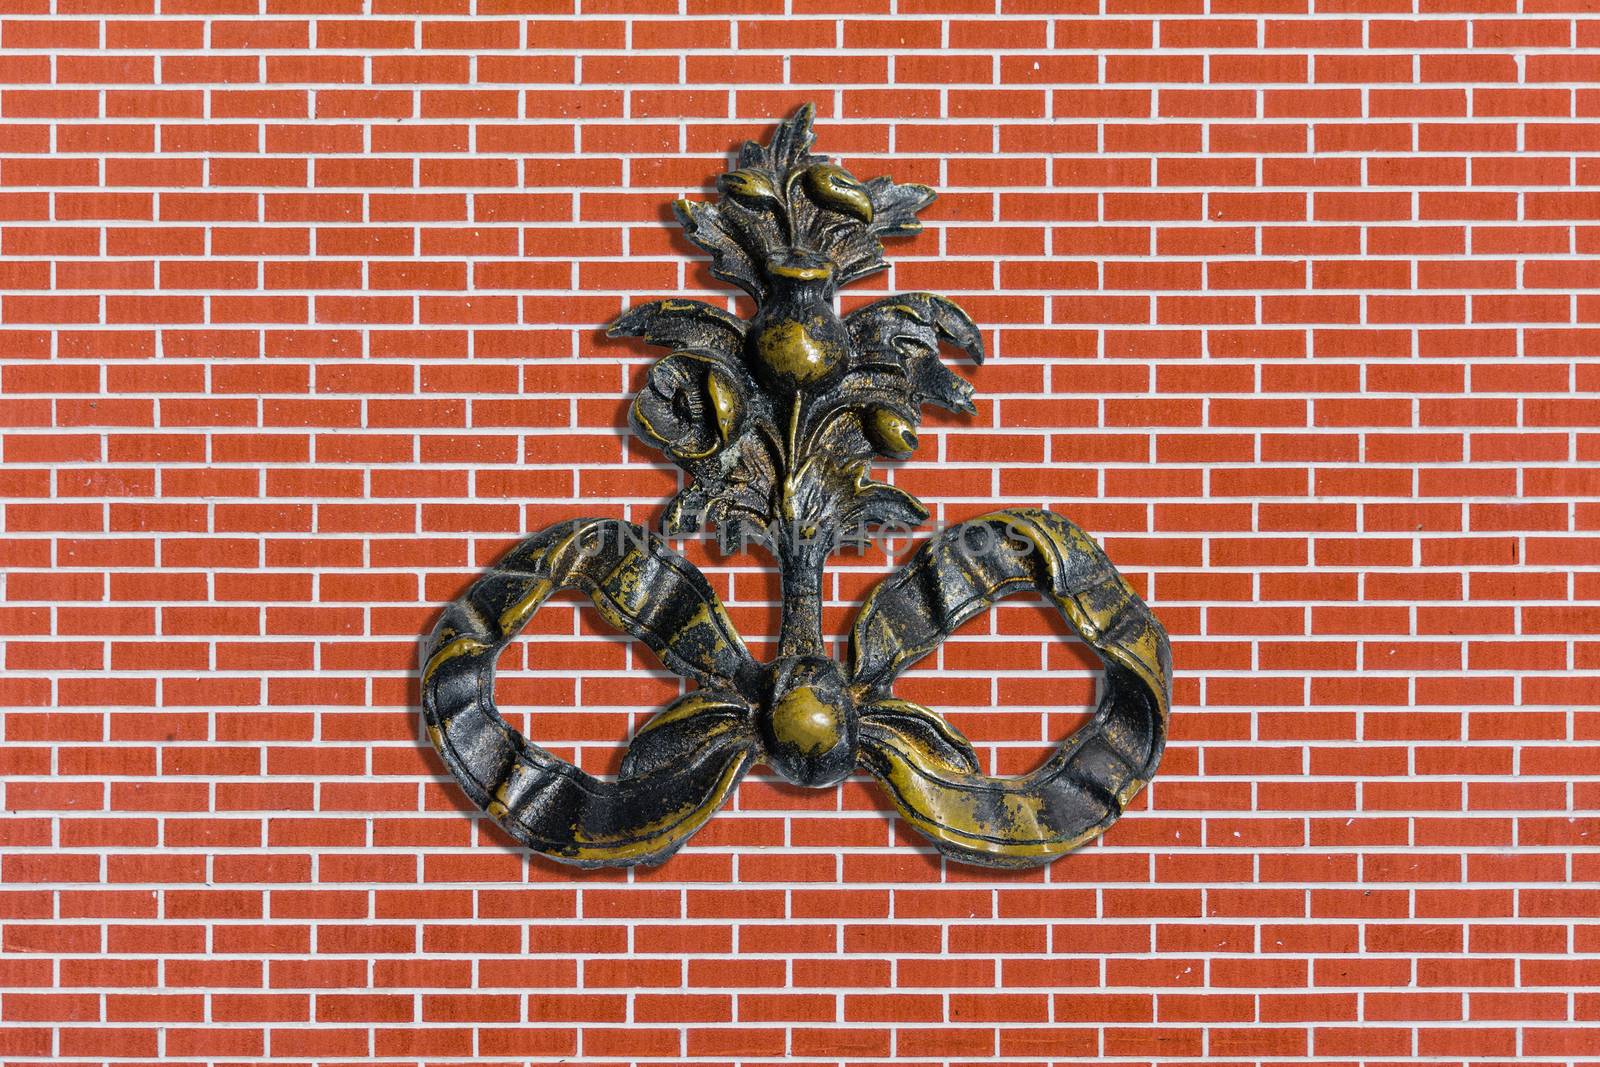 Old minted monogram on red brick wall by ben44